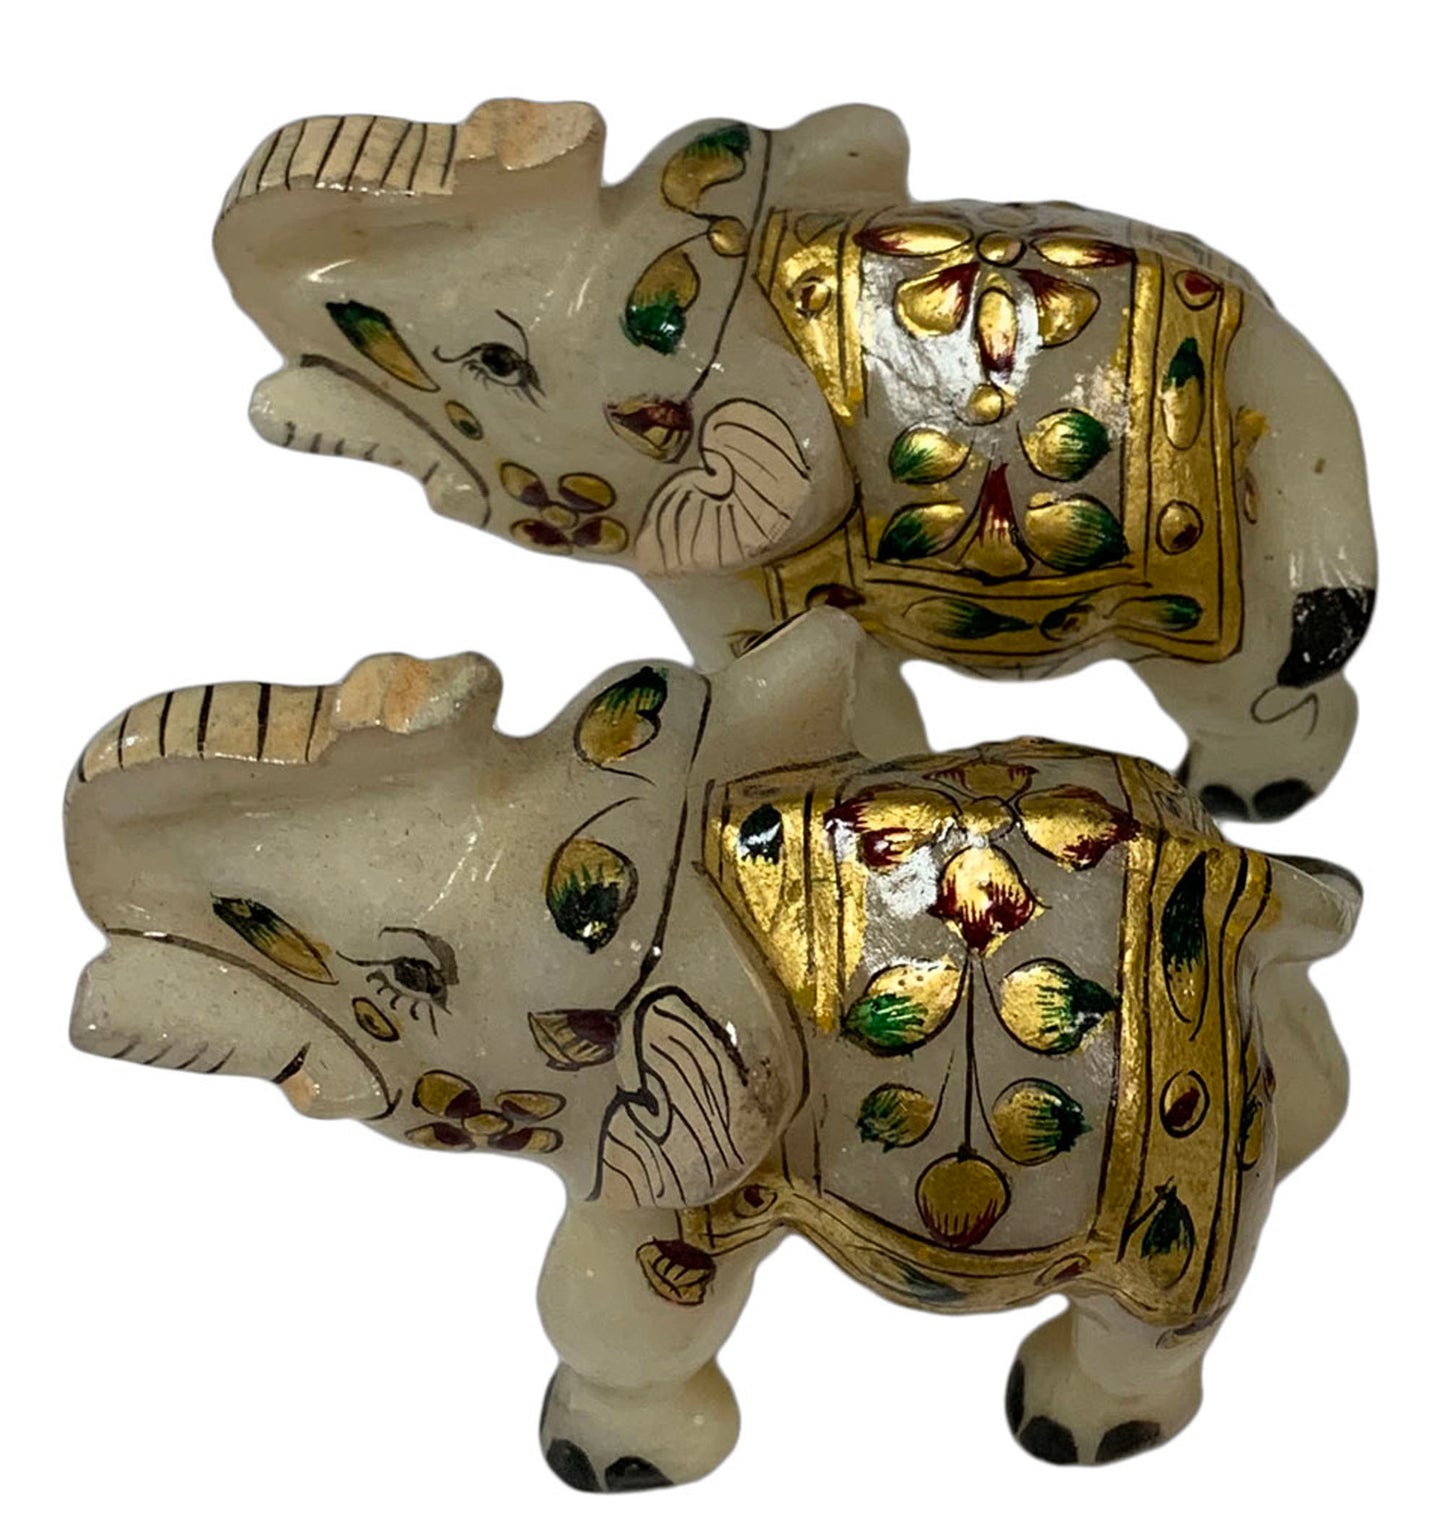 Vintage Hand-Crafted Marble Indian Collectible White Elephant Figurine - Ambali Fashion Home Accents 